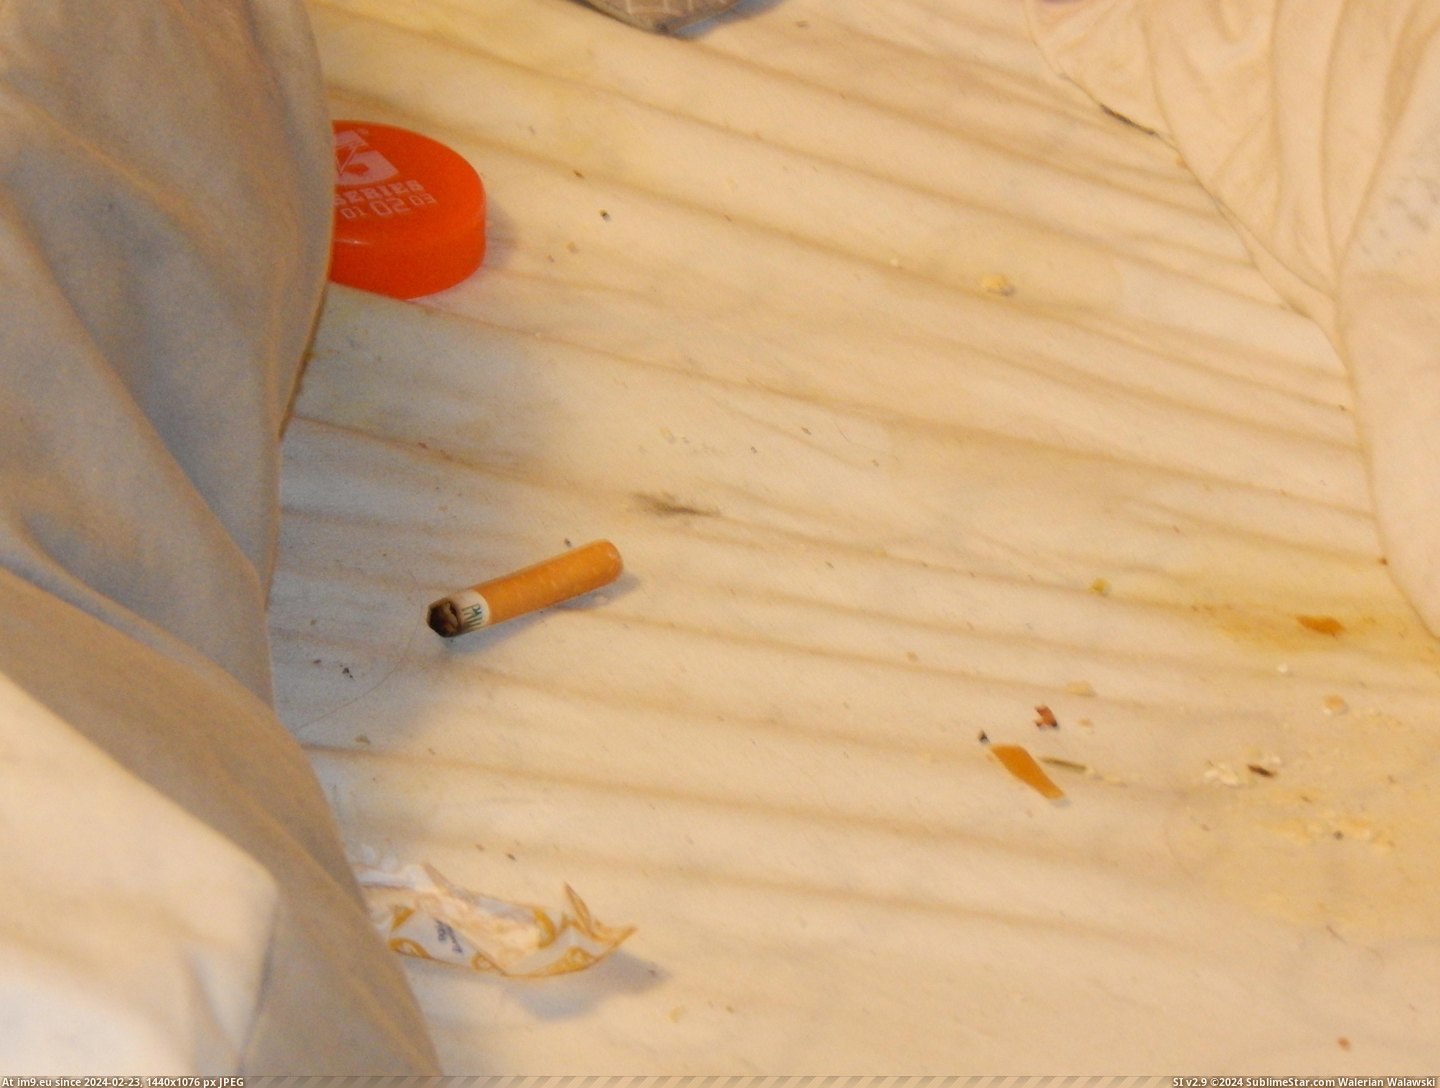 #Wtf #Was #Room #Checked #Worse #Cigs #Roommate #Smoking #Lying [Wtf] Roommate was lying about smoking cigs in her room, when we checked, what we found was definitely worse 5 Pic. (Bild von album My r/WTF favs))